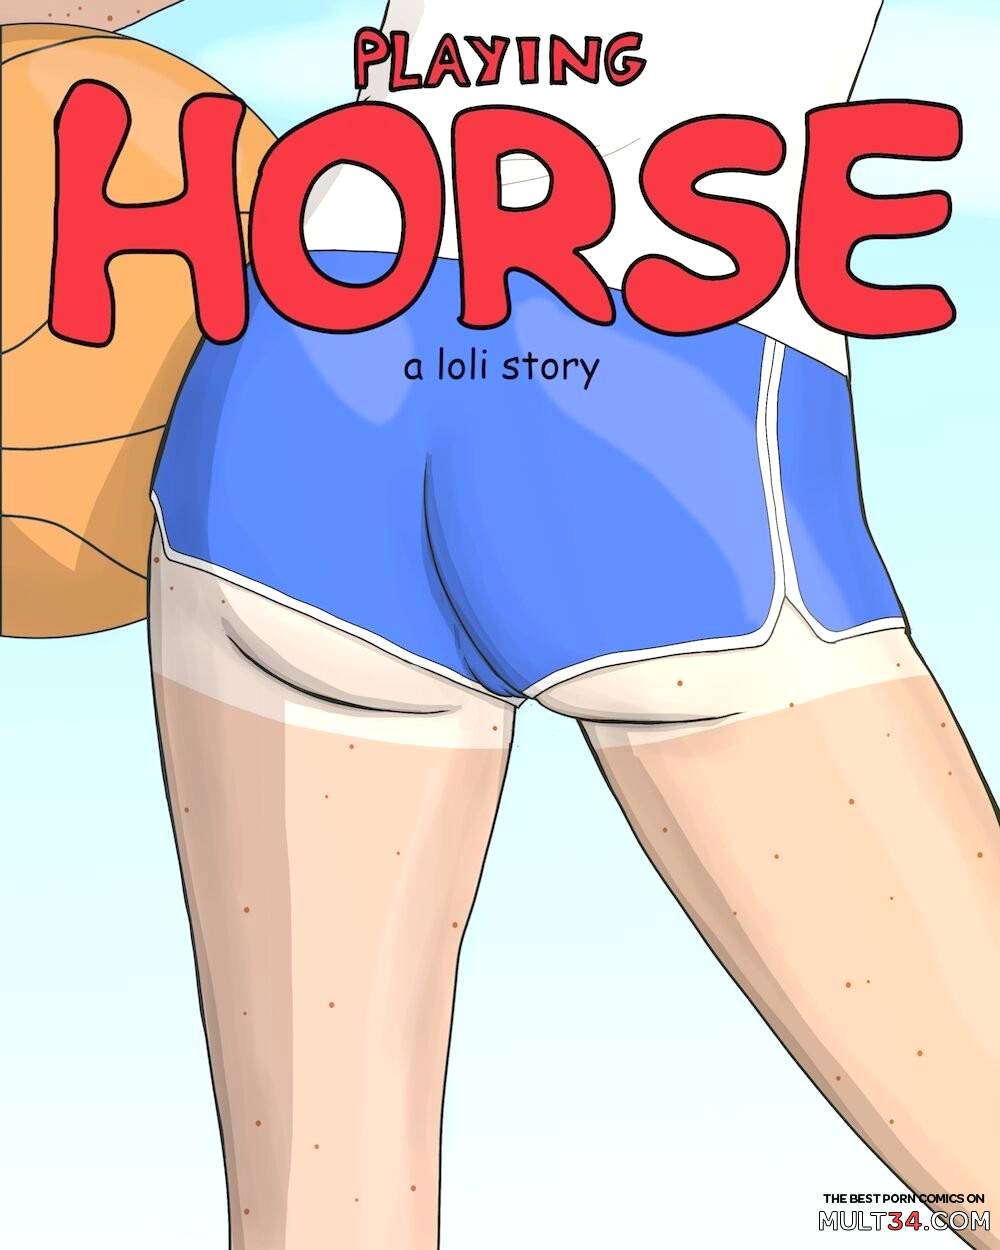 Playing Horse page 1